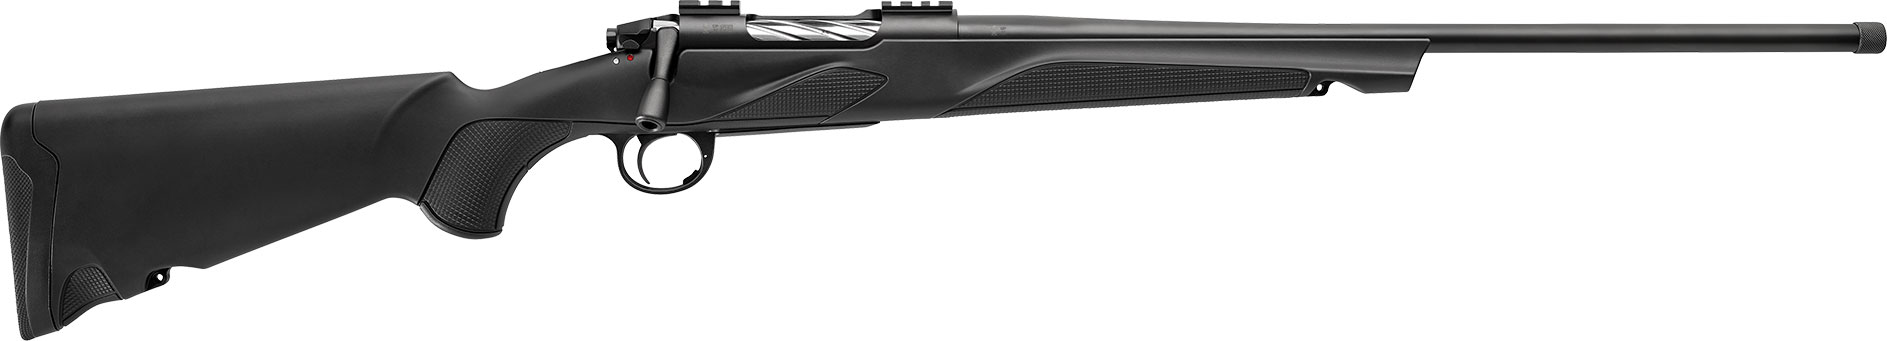 Franchi Momentum Bolt-Action Rifle 41520, .270 Winchester, 22 in Threaded, Synthetic Stock, Black Finish